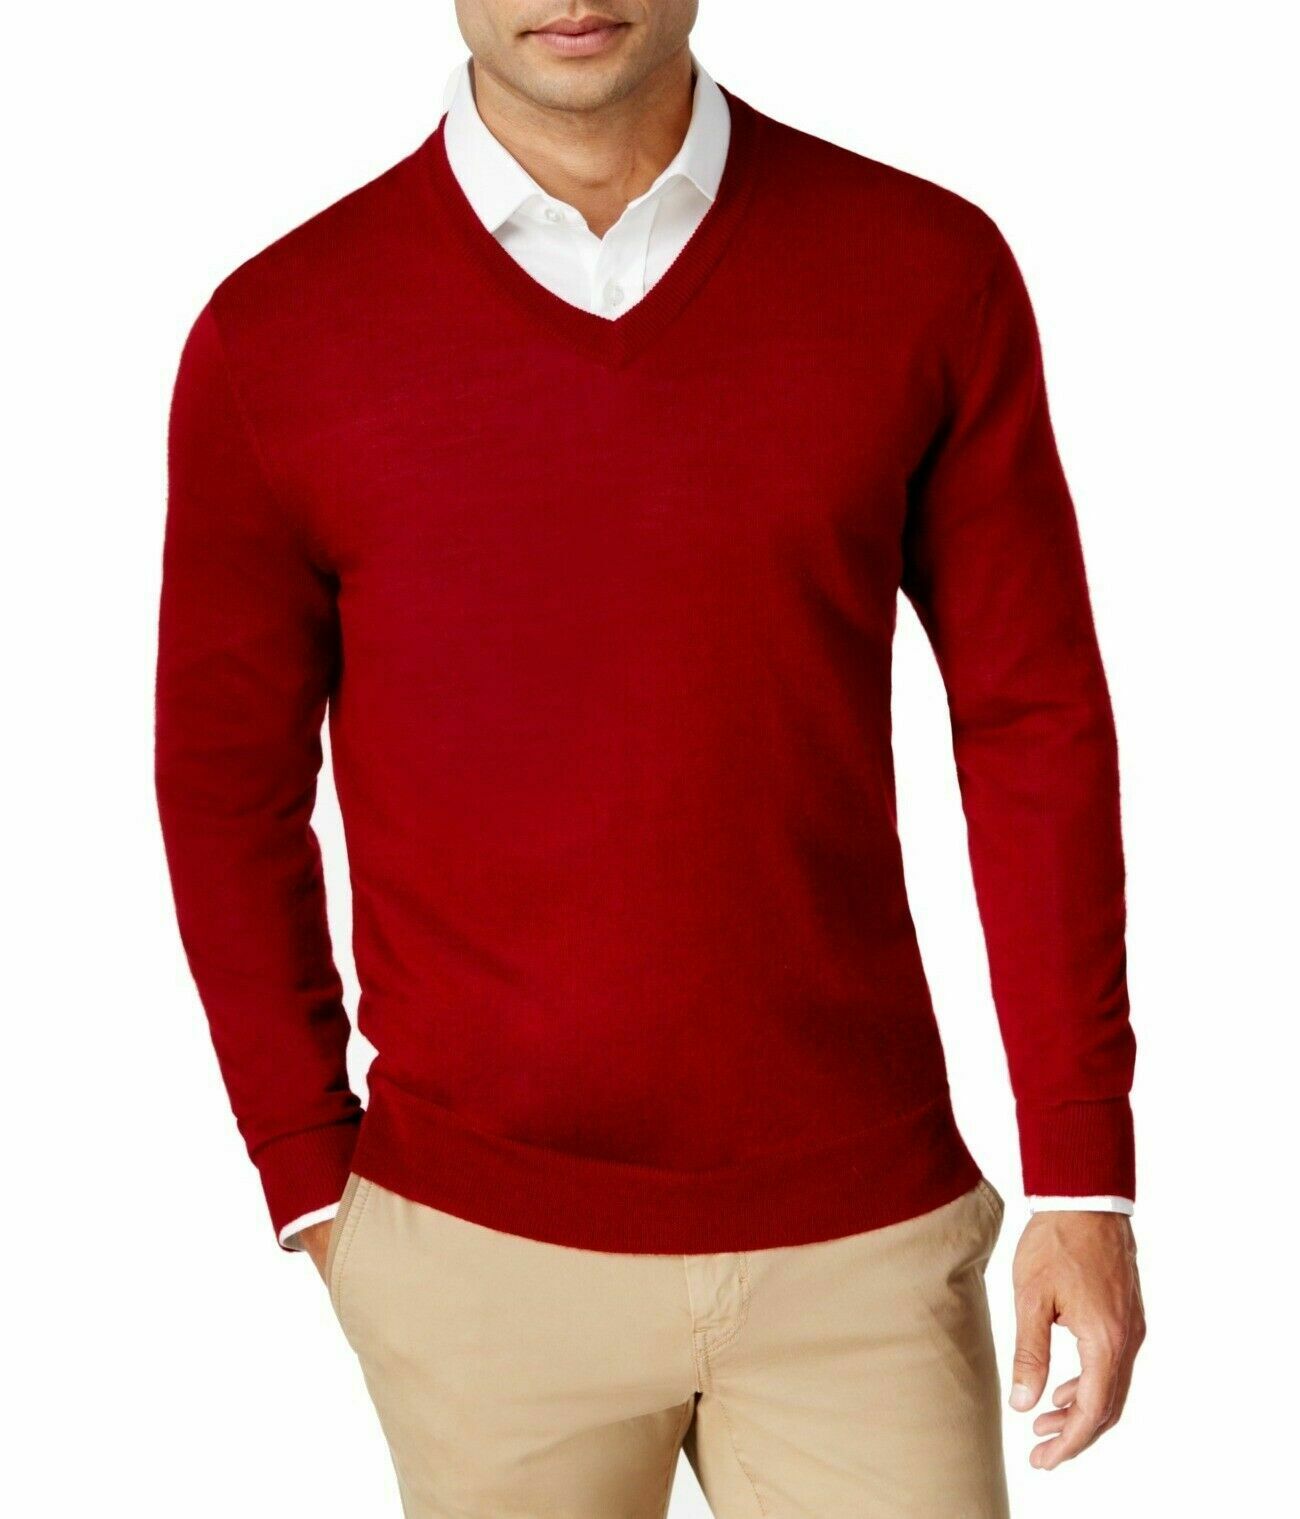 Club Room Mens Sweater Cherry Red Ribbed Trim Pullover V-neck $75